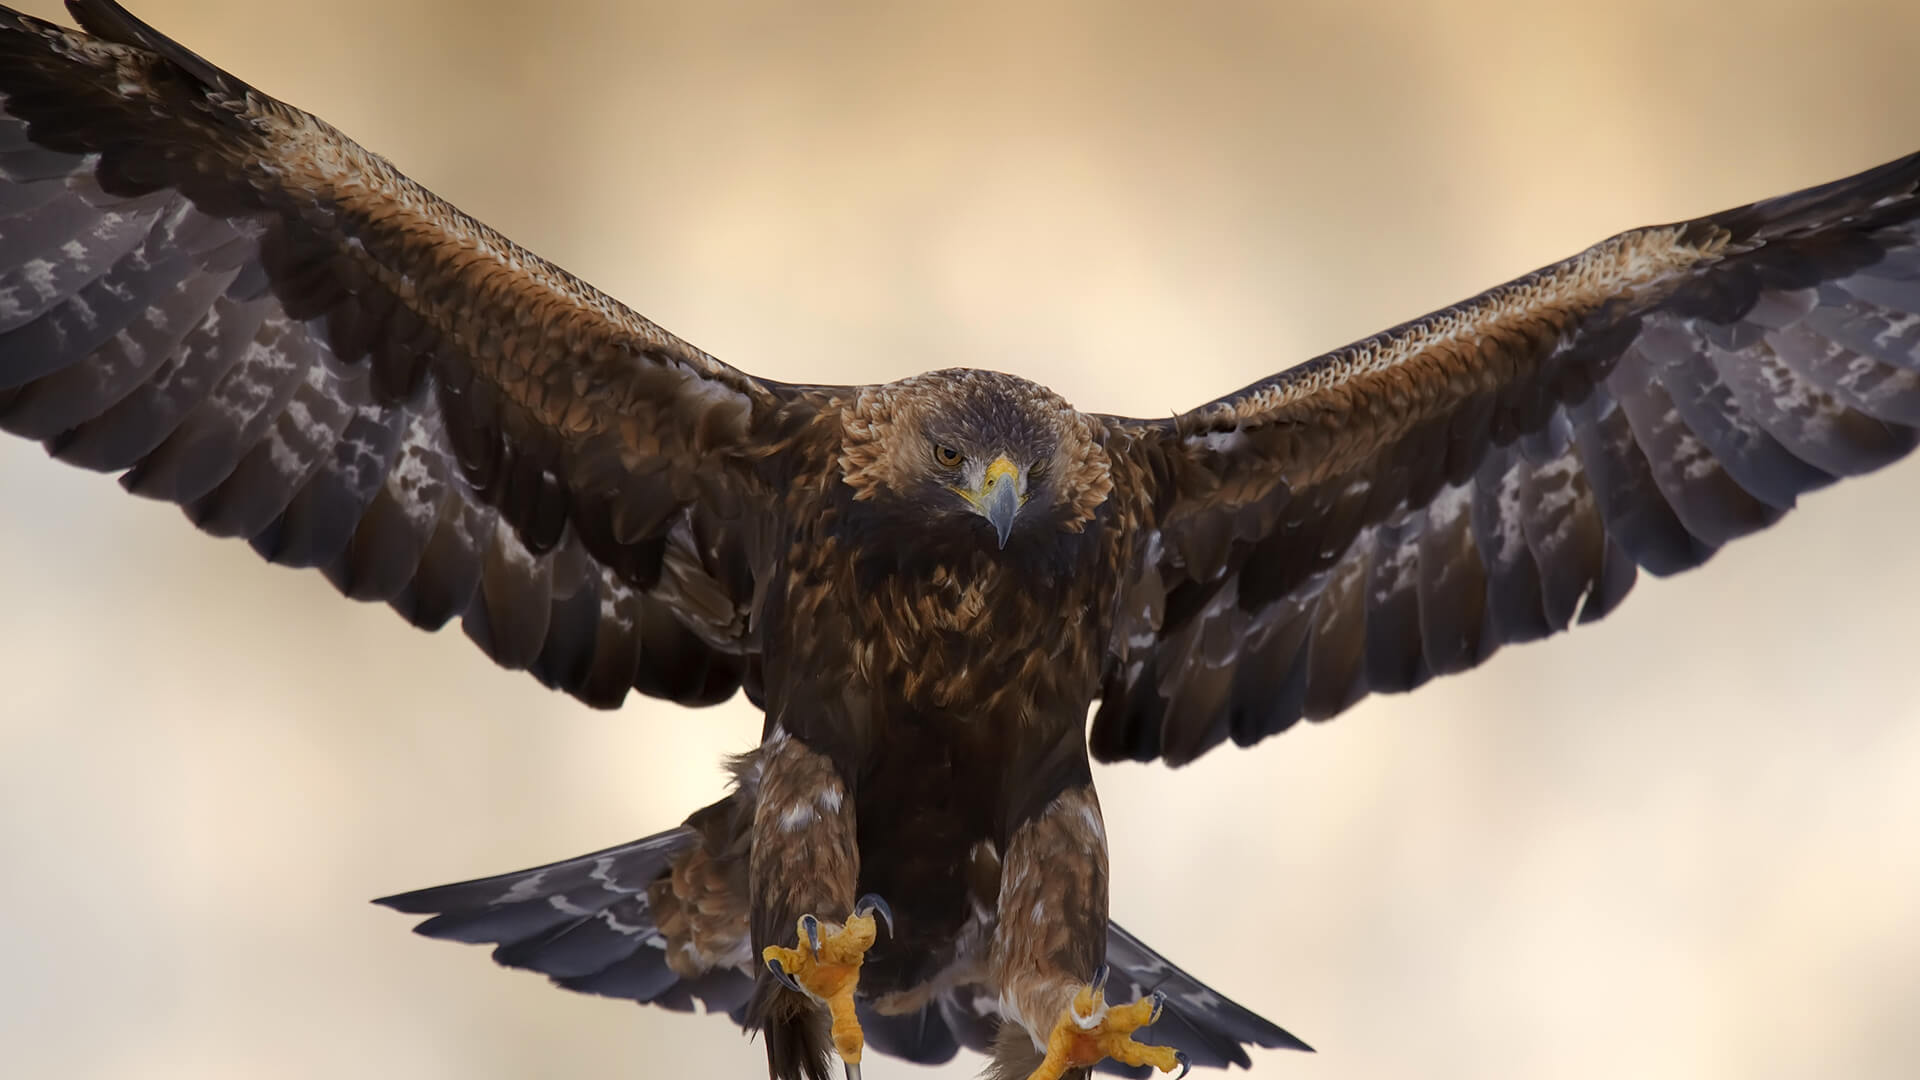 Golden eagle with wings spread and talons extended as it goes in for a landing